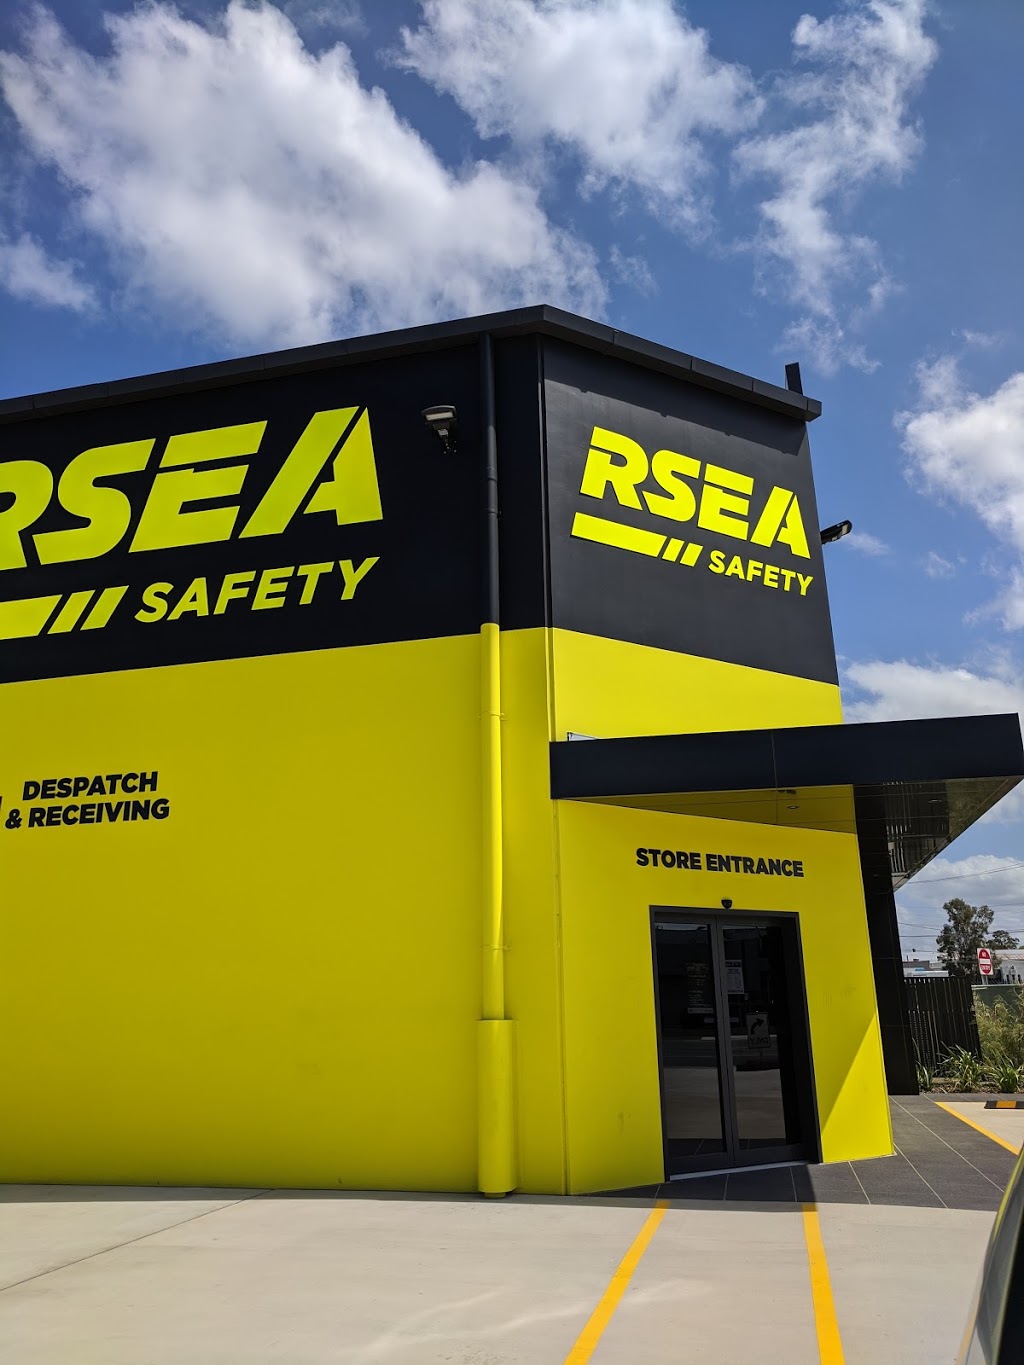 RSEA Safety Coopers Plains | 938 Beaudesert Rd, Coopers Plains QLD 4108, Australia | Phone: (07) 3277 3099